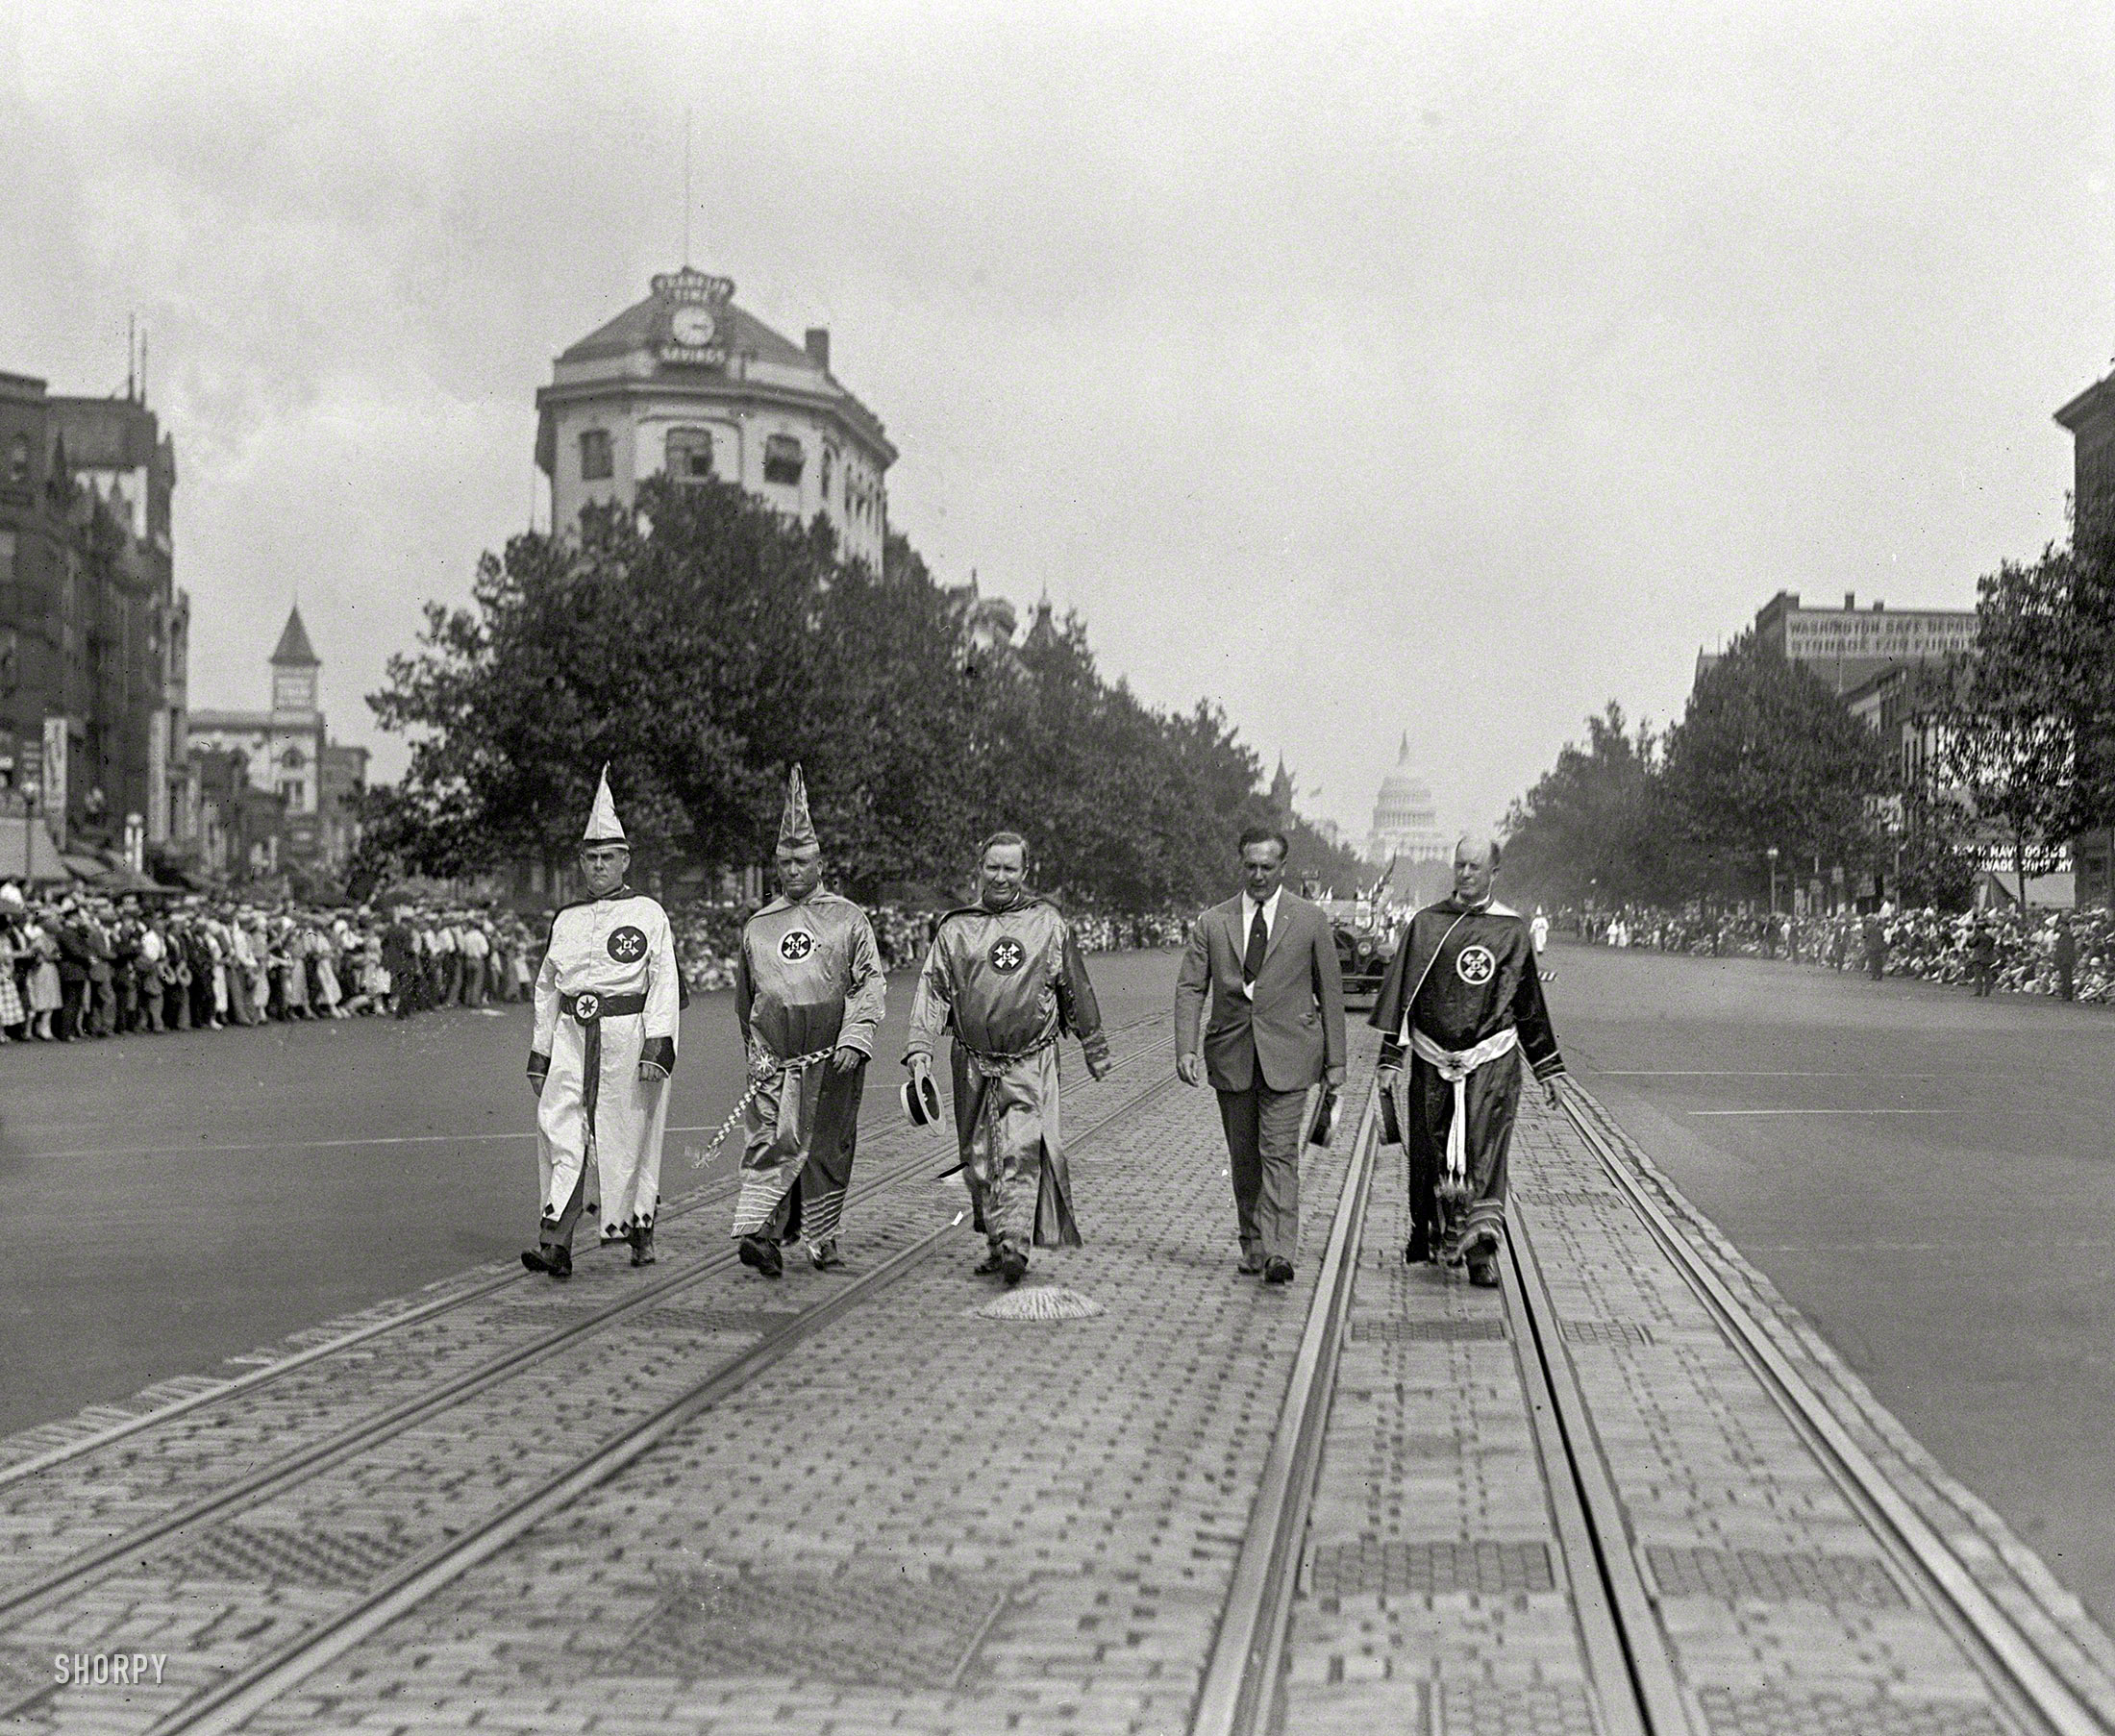 August 8, 1925. "Dr. H.W. Evans, Imperial Wizard of the Ku Klux Klan, K.K.K. parade, Washington." National Photo Company glass negative. View full size.